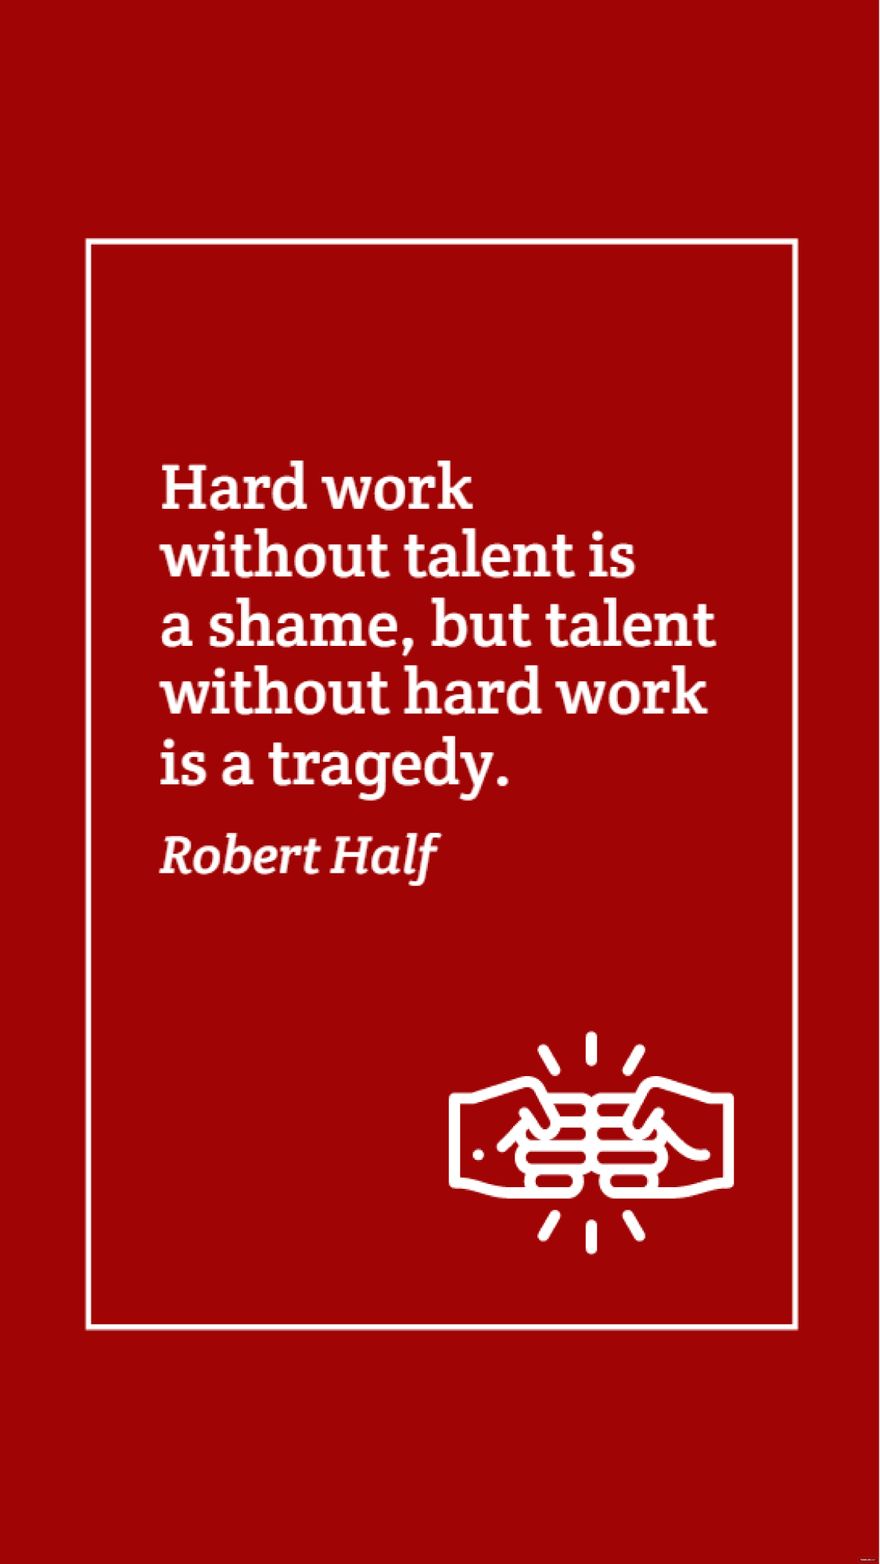 Robert Half - Hard work without talent is a shame, but talent without hard work is a tragedy.